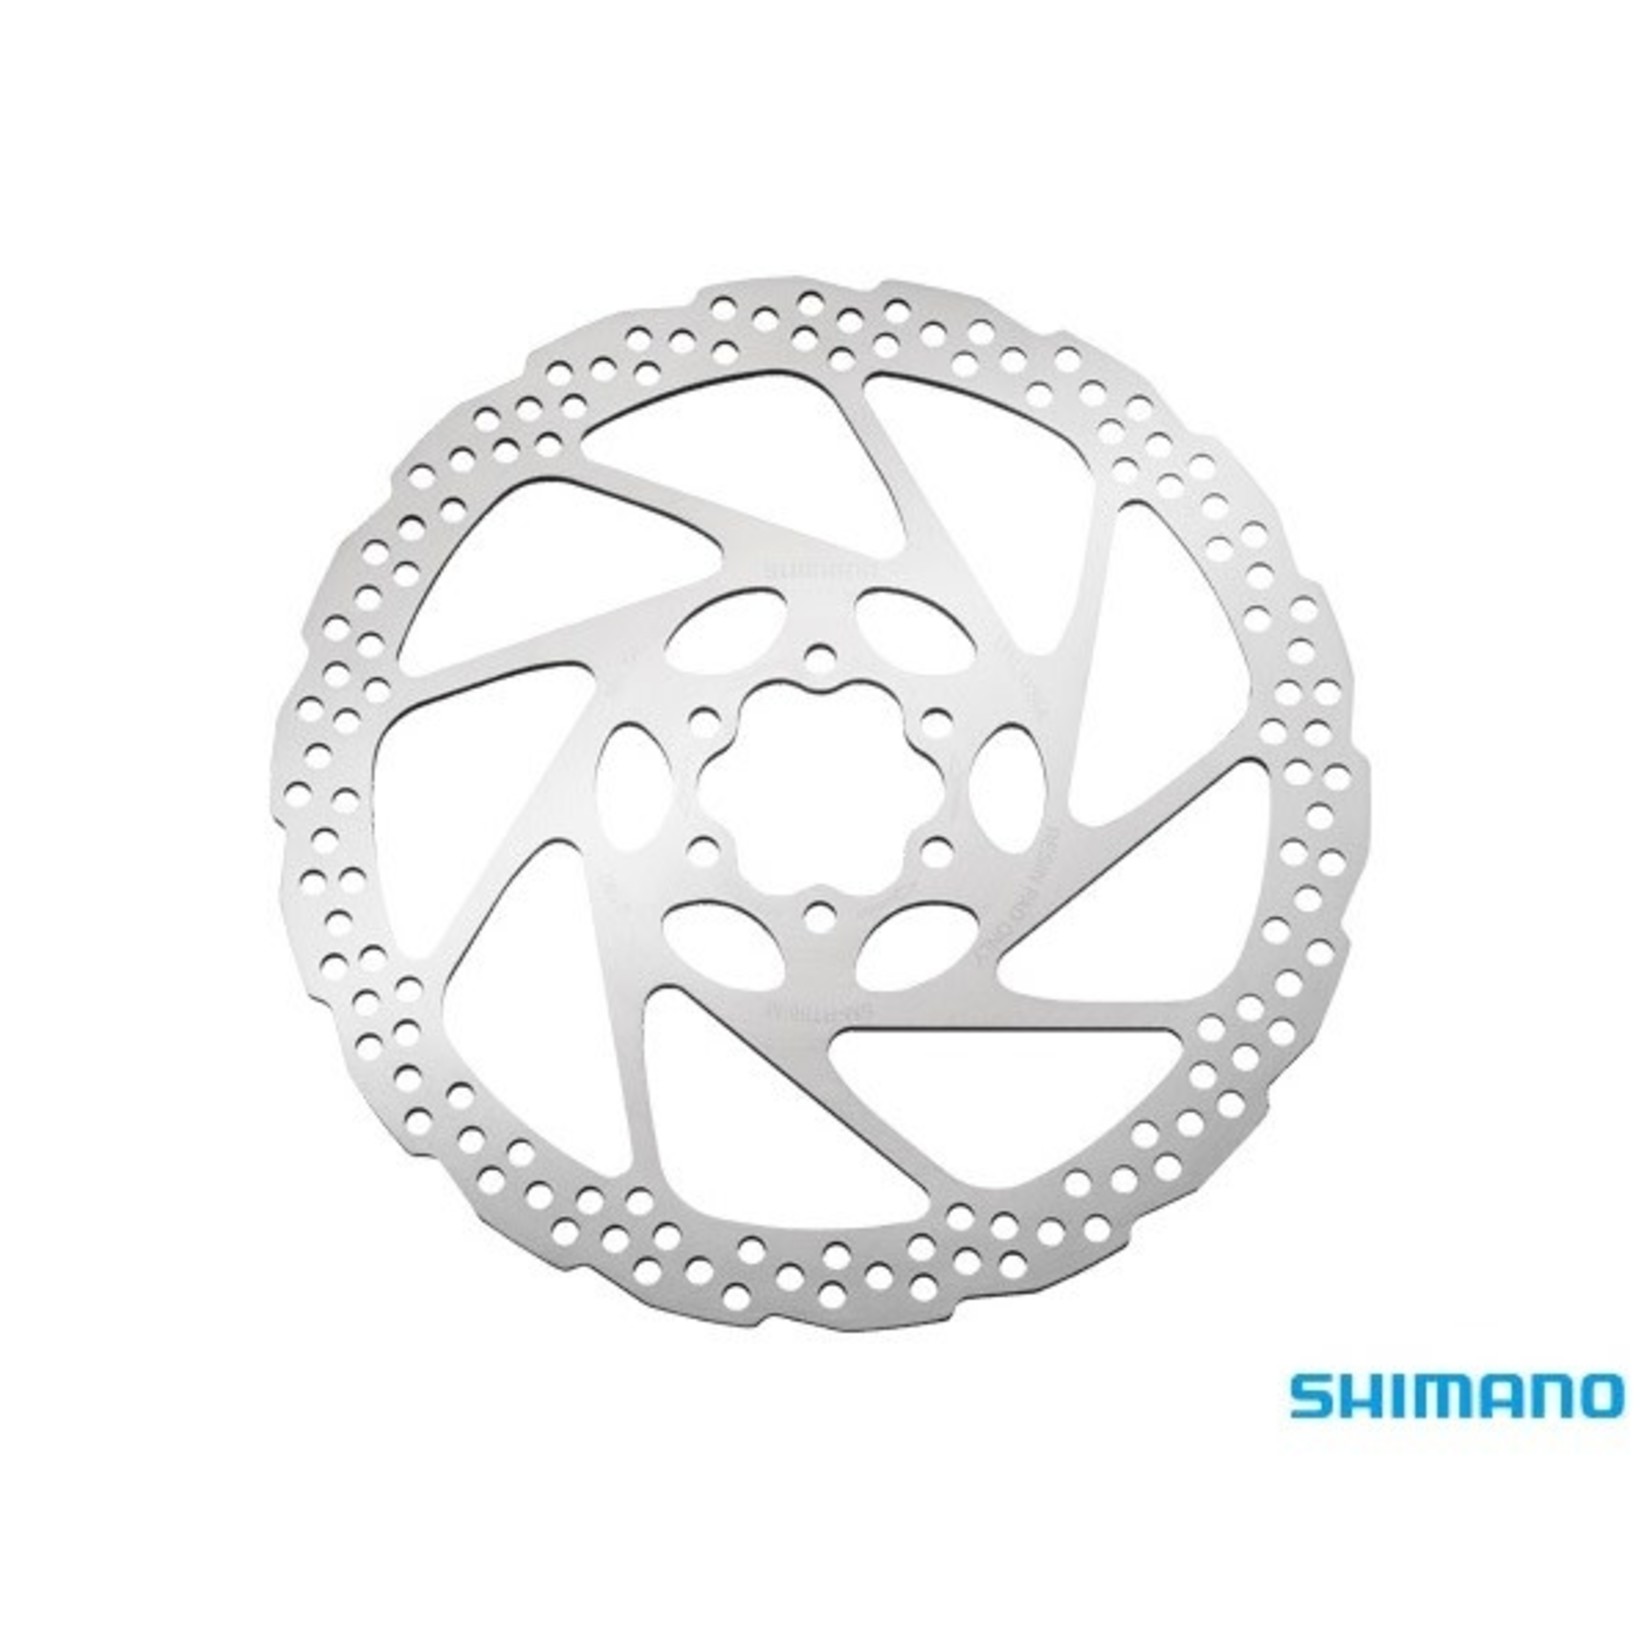 SHIMANO SHIMANO SM-RT56 DISC ROTOR 180mm DEORE 6-BOLT for RESIN PAD